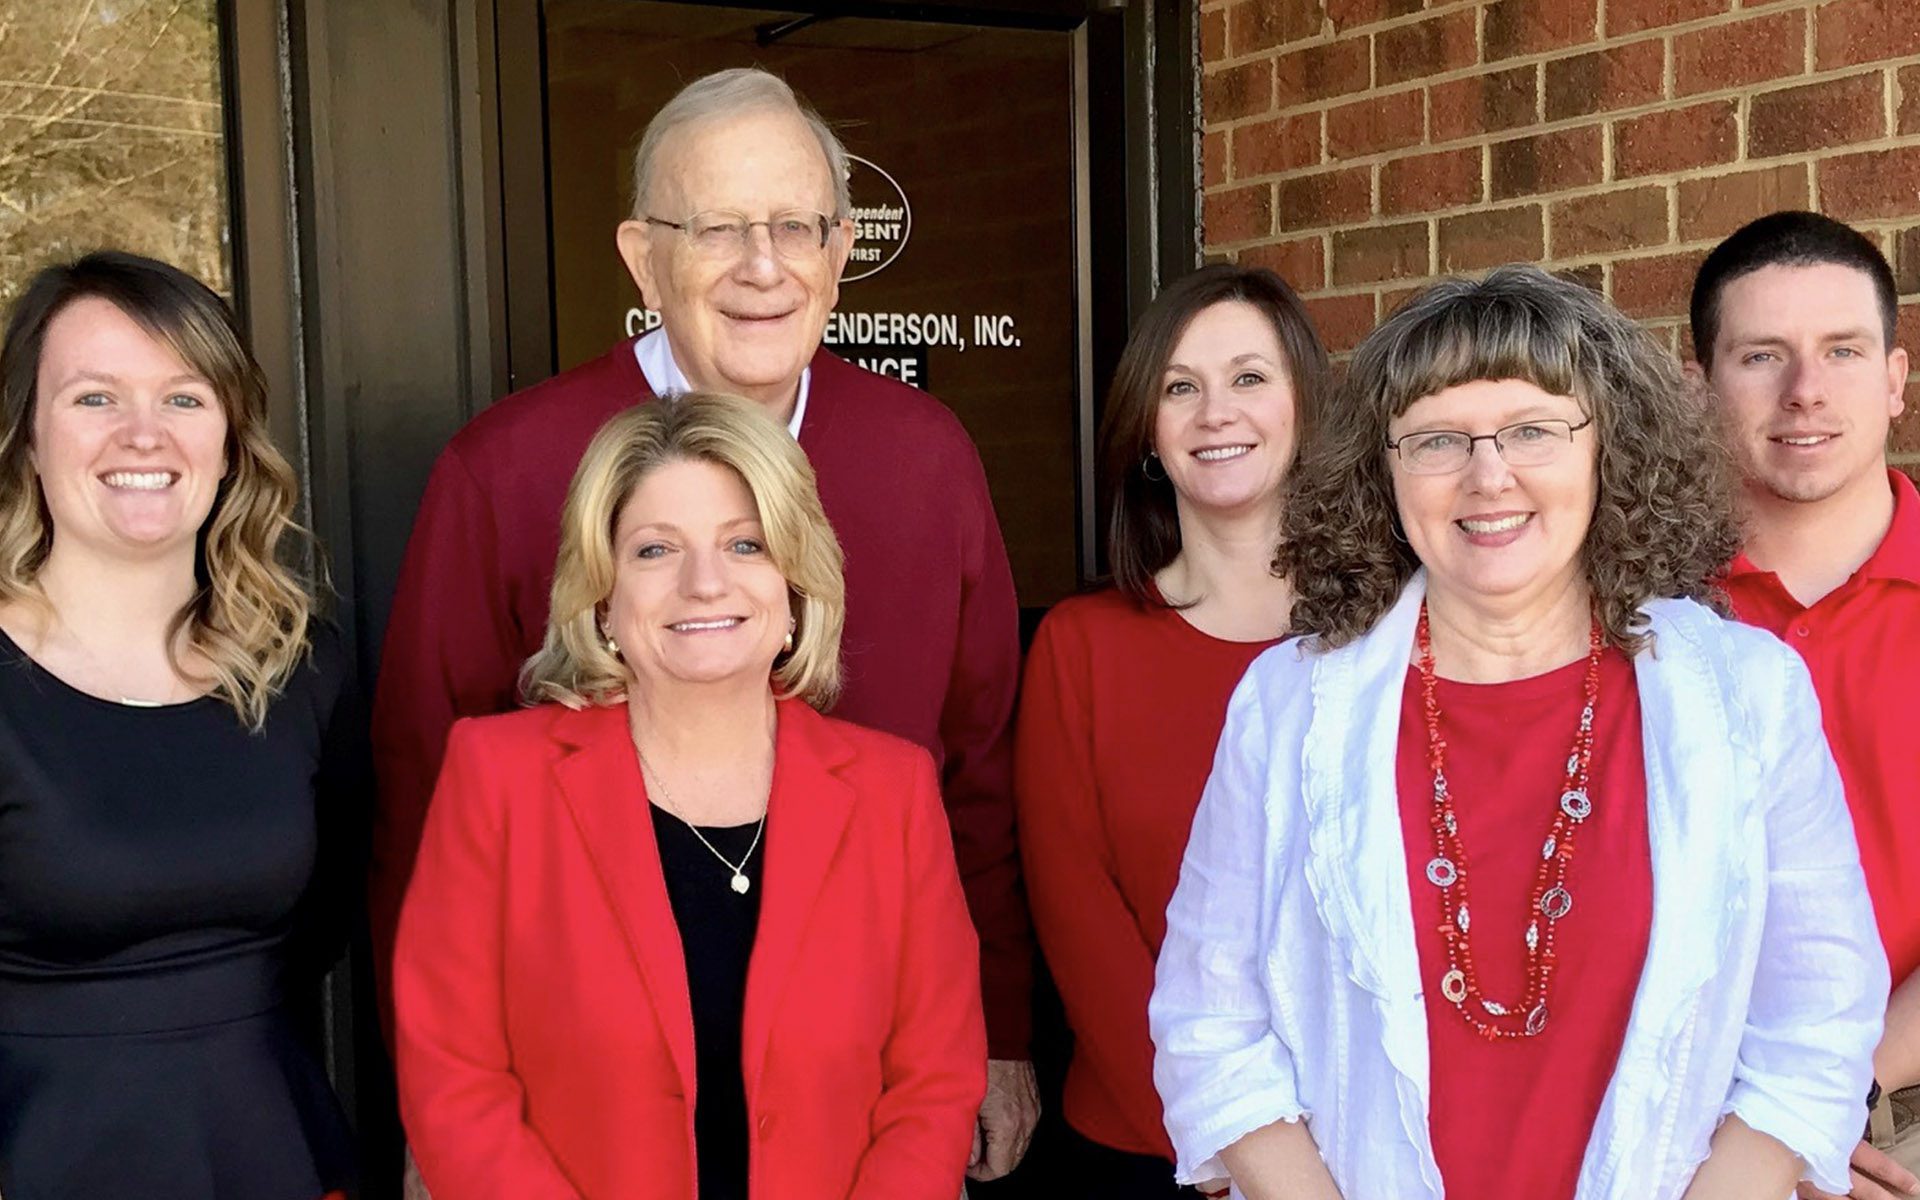 Homepage - The Crawford-Henderson Insurance Team Posing Together in Front of the Entrance to Their Office